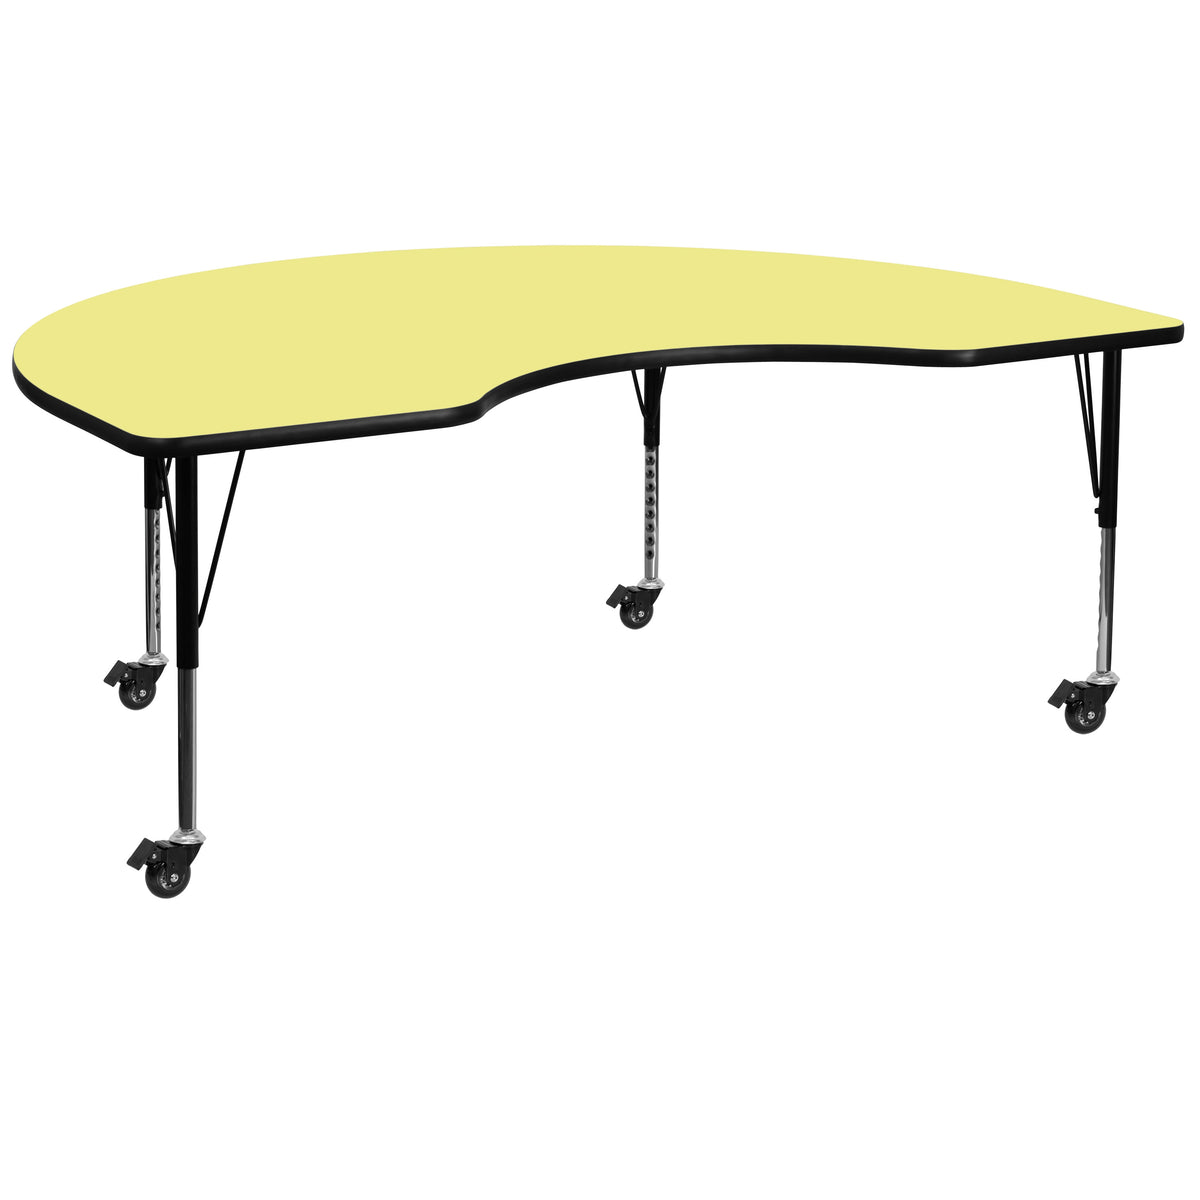 Yellow |#| Mobile 48inchW x 96inchL Kidney Yellow Thermal Laminate Adjustable Activity Table